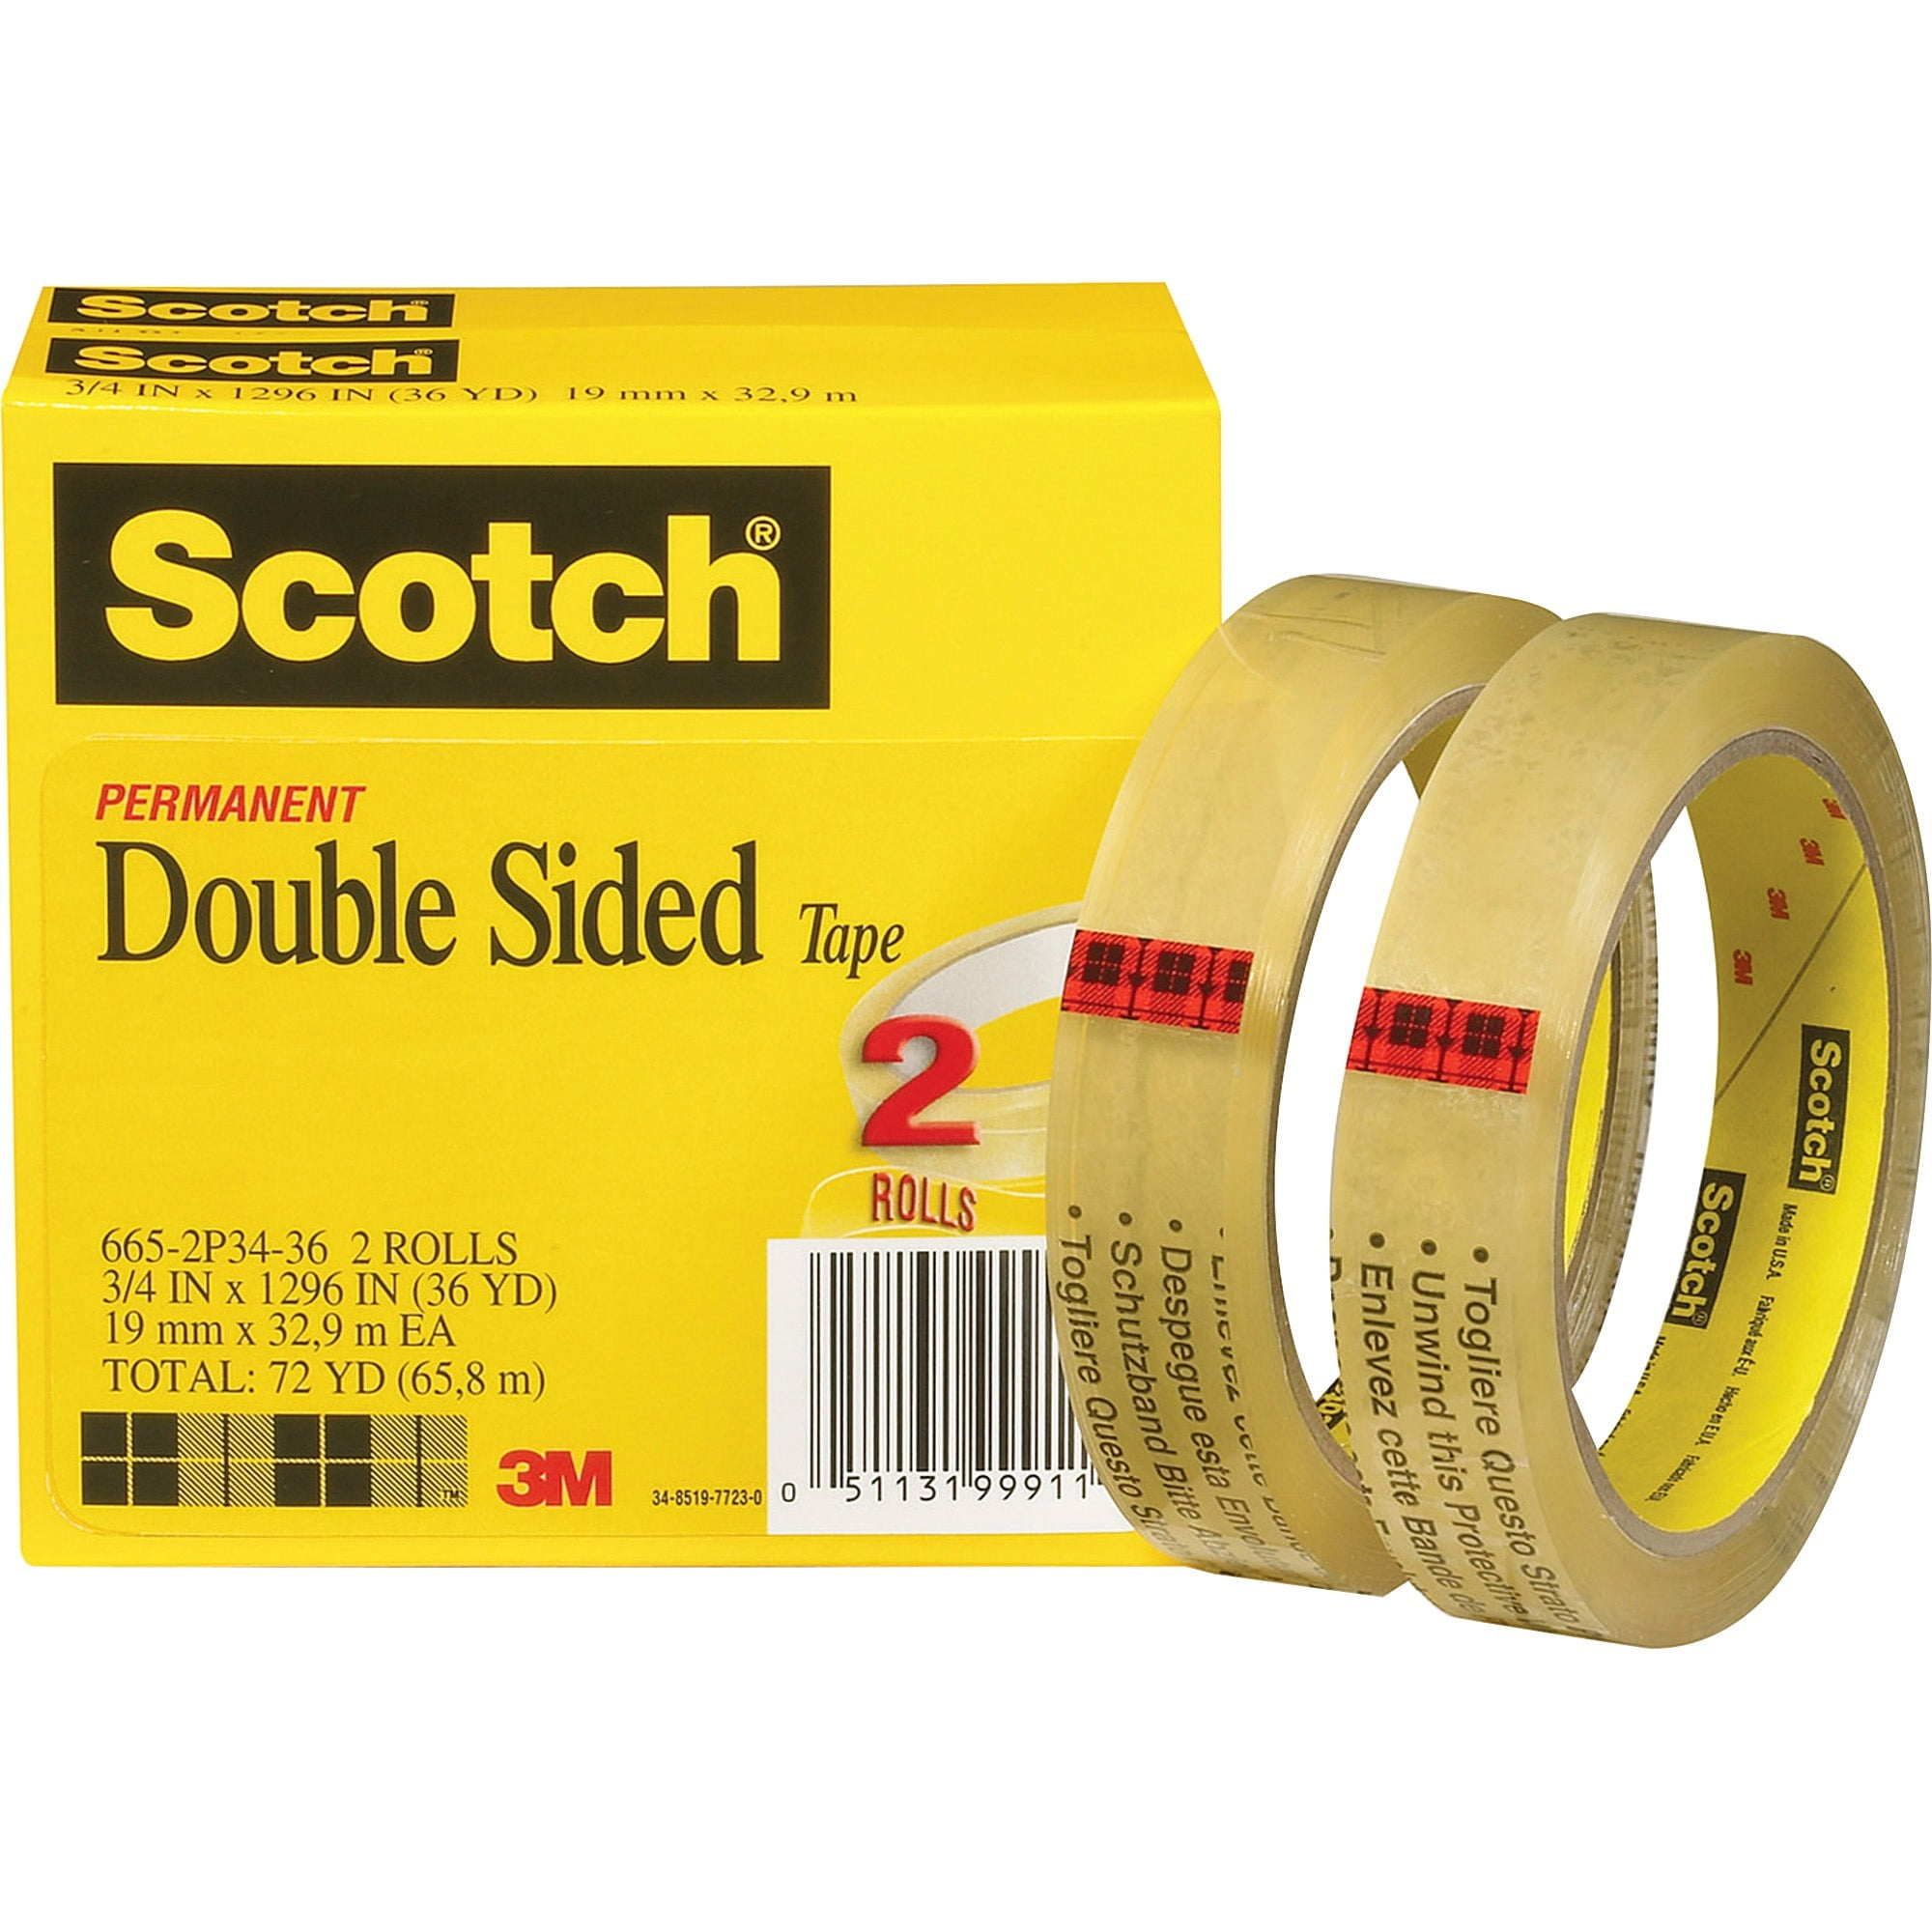 of 1/2" Double-Sided Clear Tape Adhesive 10 Yards 2 Rolls 30ft. transparent 